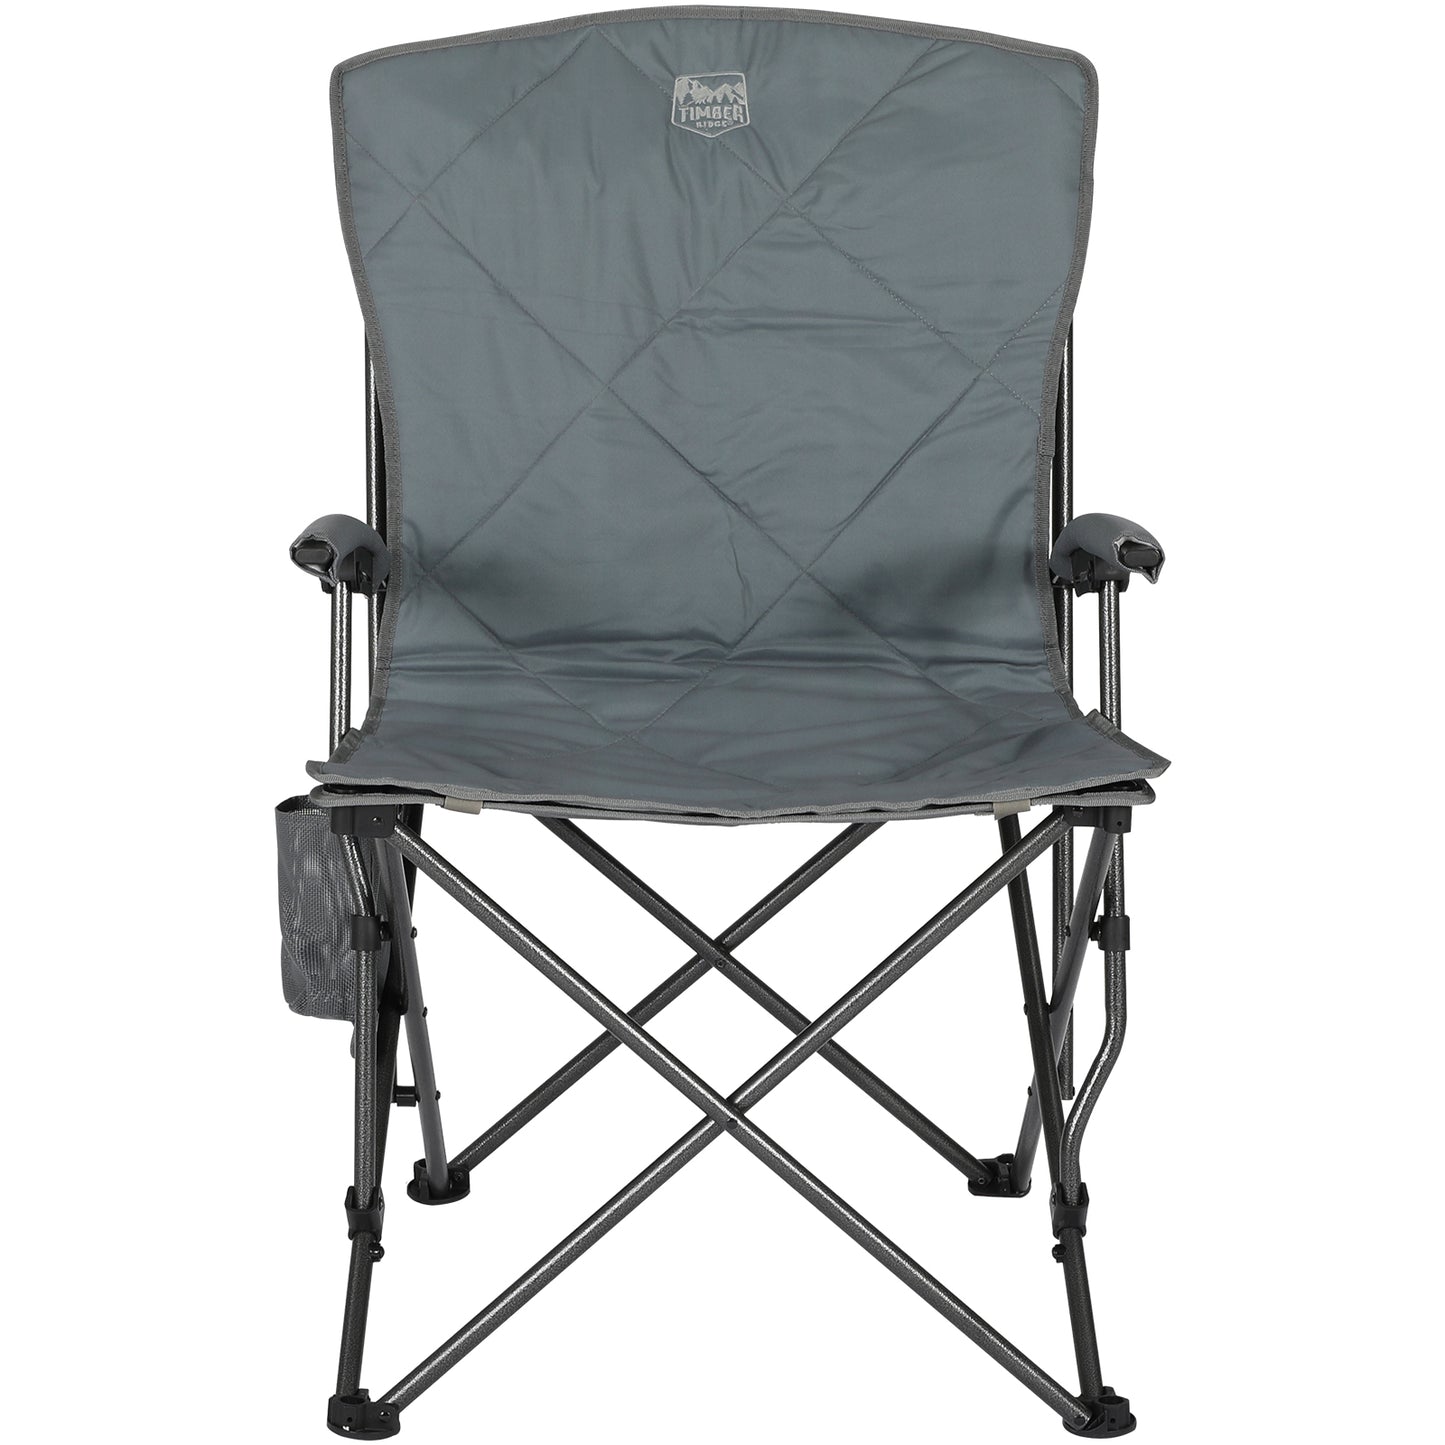 Timber Ridge® Hot and Cold Quad Chair, Gray